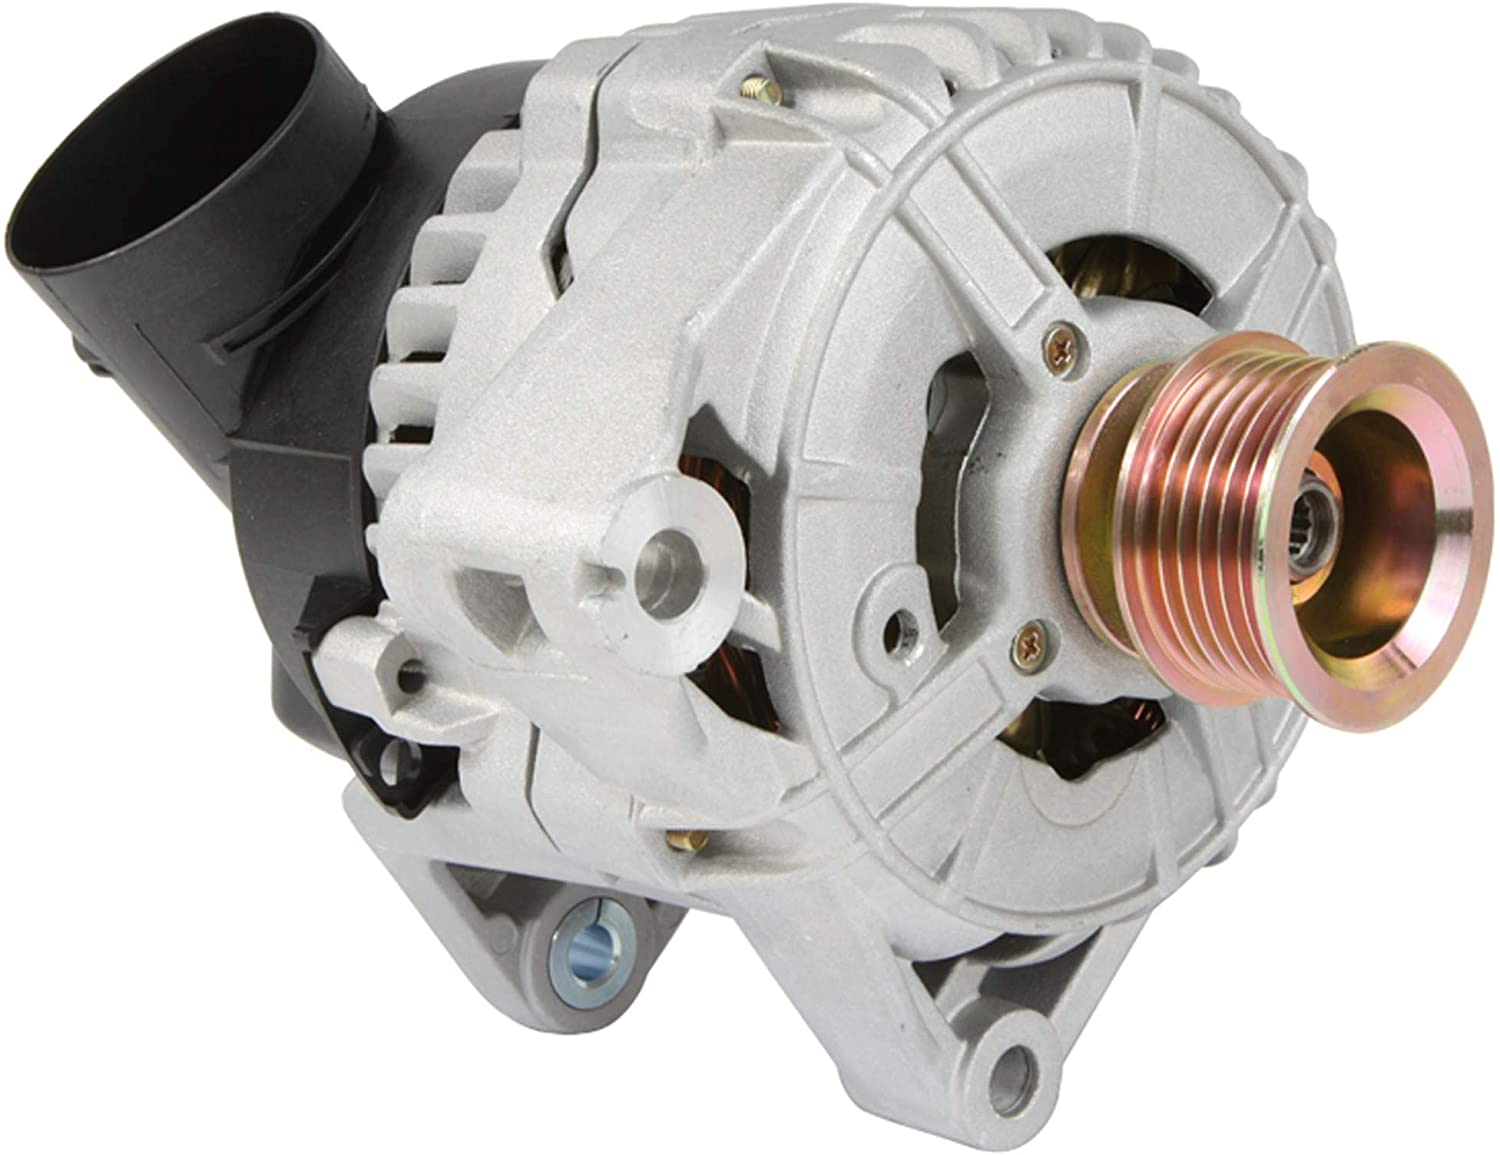 DB Electrical ABO0259 Alternator Compatible With/Replacement For 320 323 325 328 525 M3 Z3 BMW 1992-2000 2.5L 3.0L 3.2L 2.8L 2.0L 0-120-465-031 12-31-1-738-351